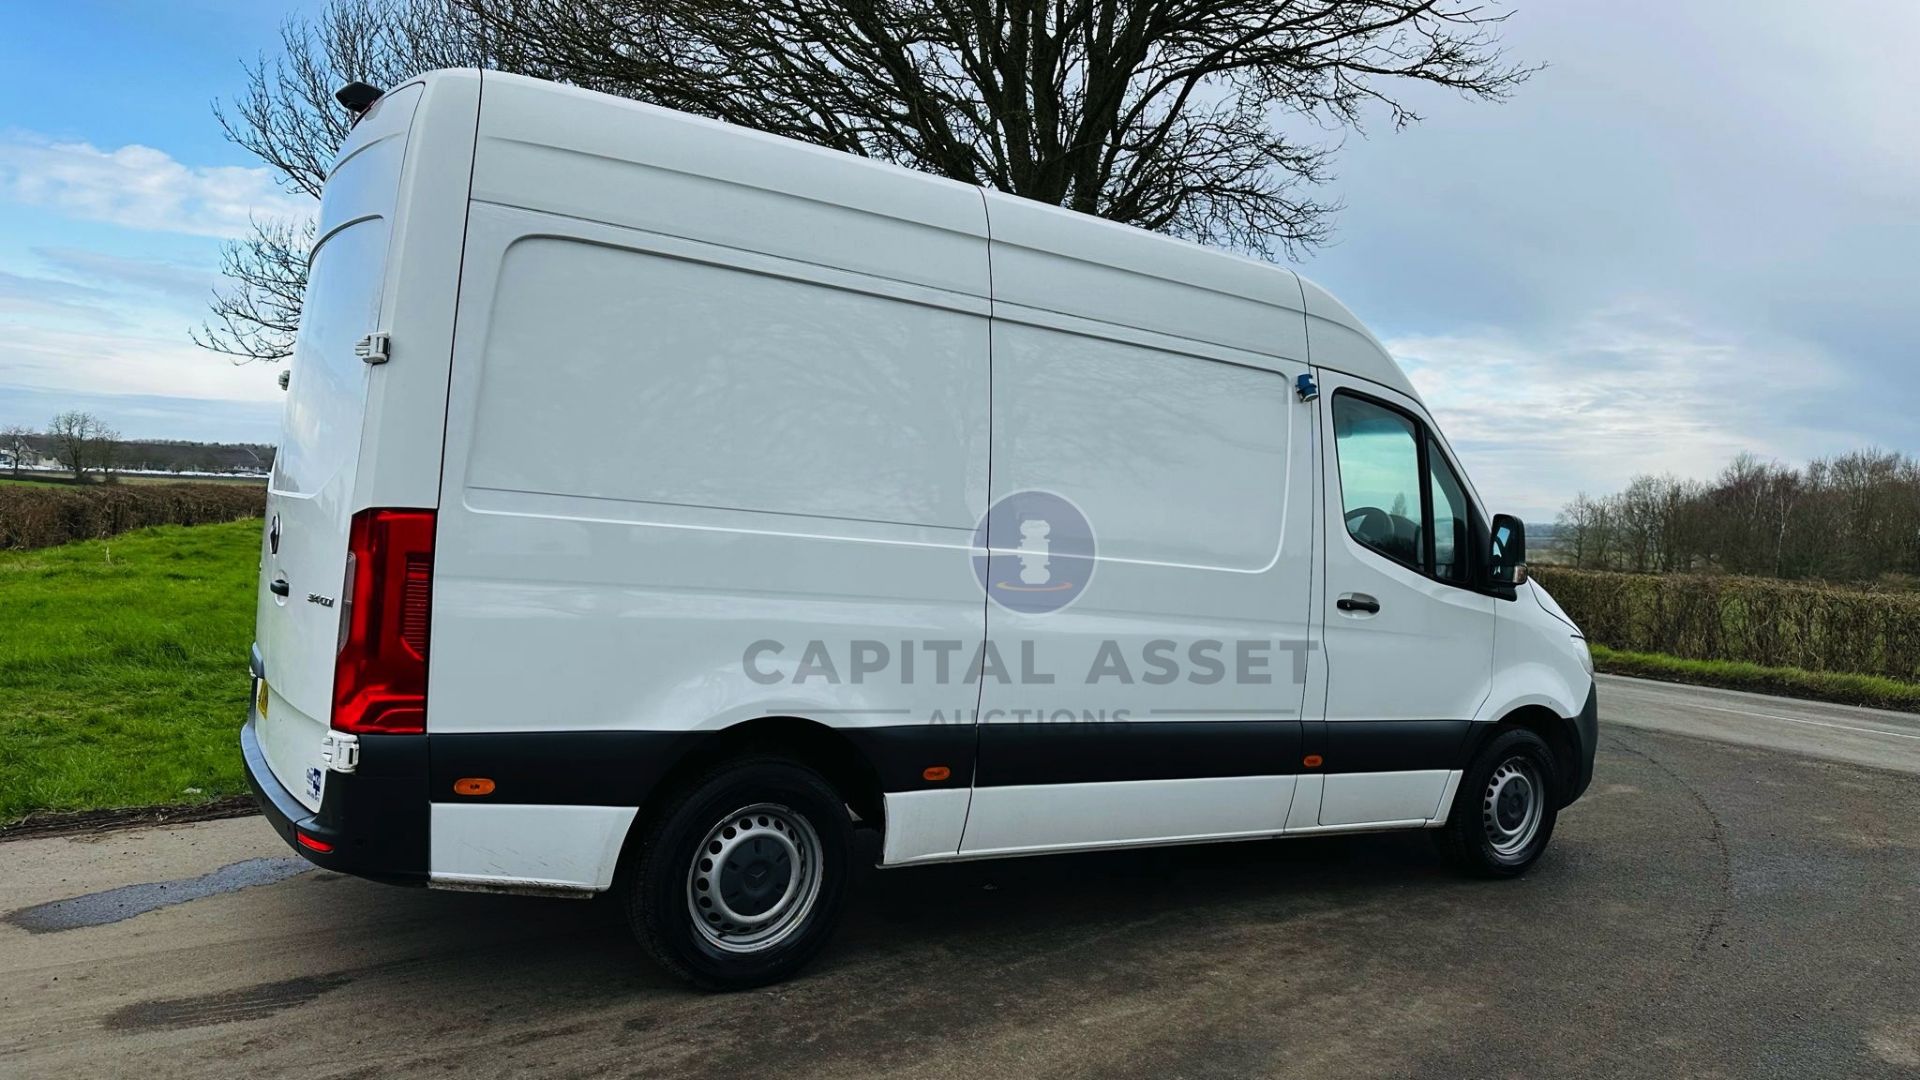 MERCEDES-BENZ SPRINTER 314 CDI *MWB - REFRIGERATED VAN* (2019 - FACELIFT MODEL) *OVERNIGHT STANDBY* - Image 15 of 41